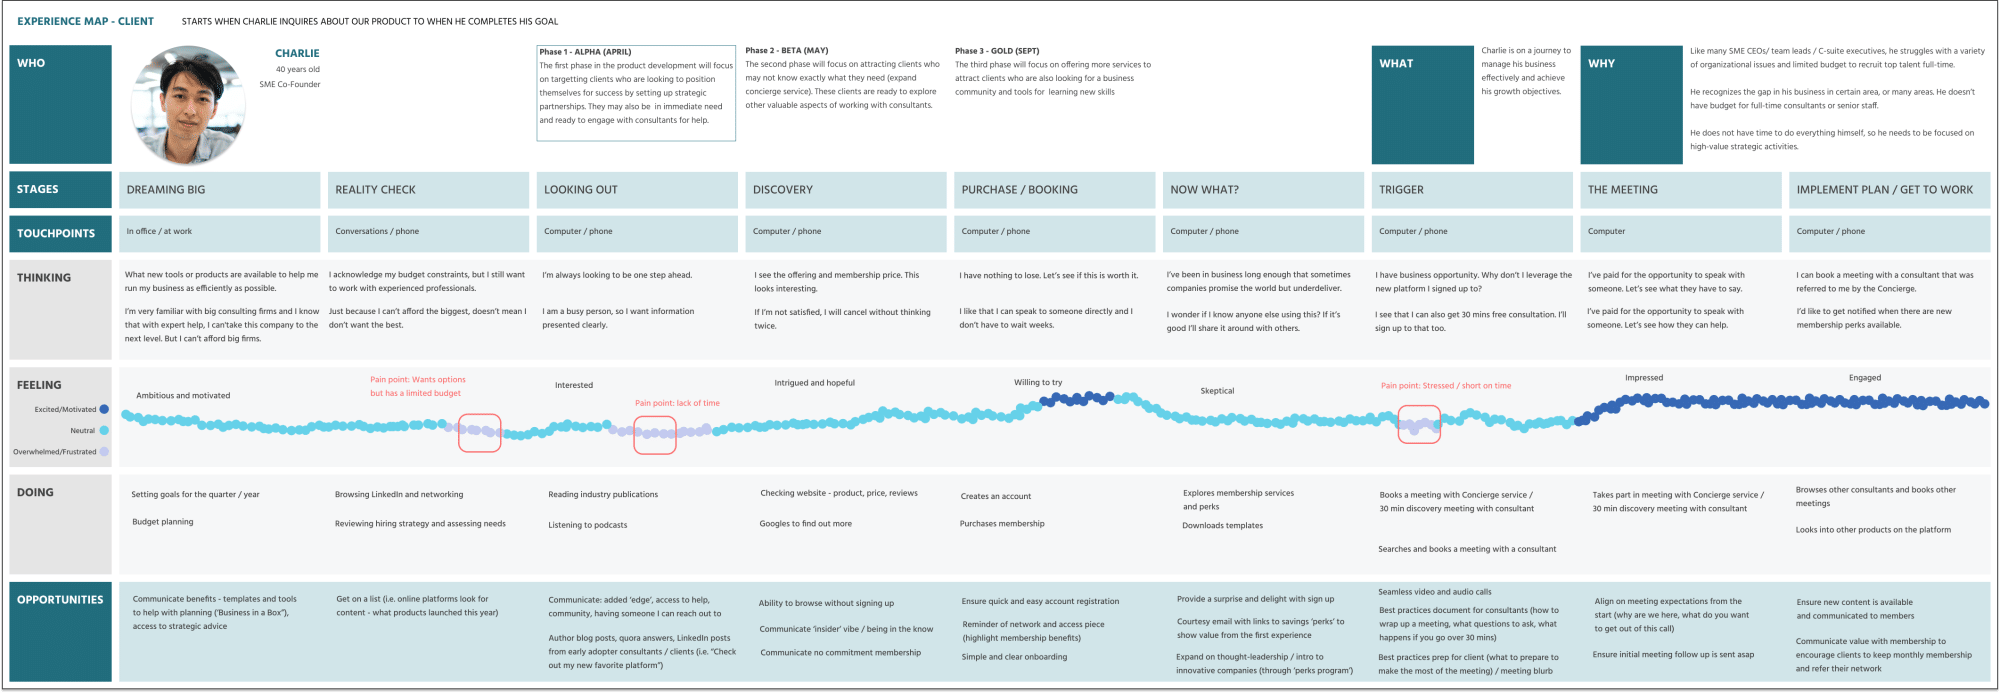 Cansulta client journey map, showing client moving through a pain point to fully engaged.